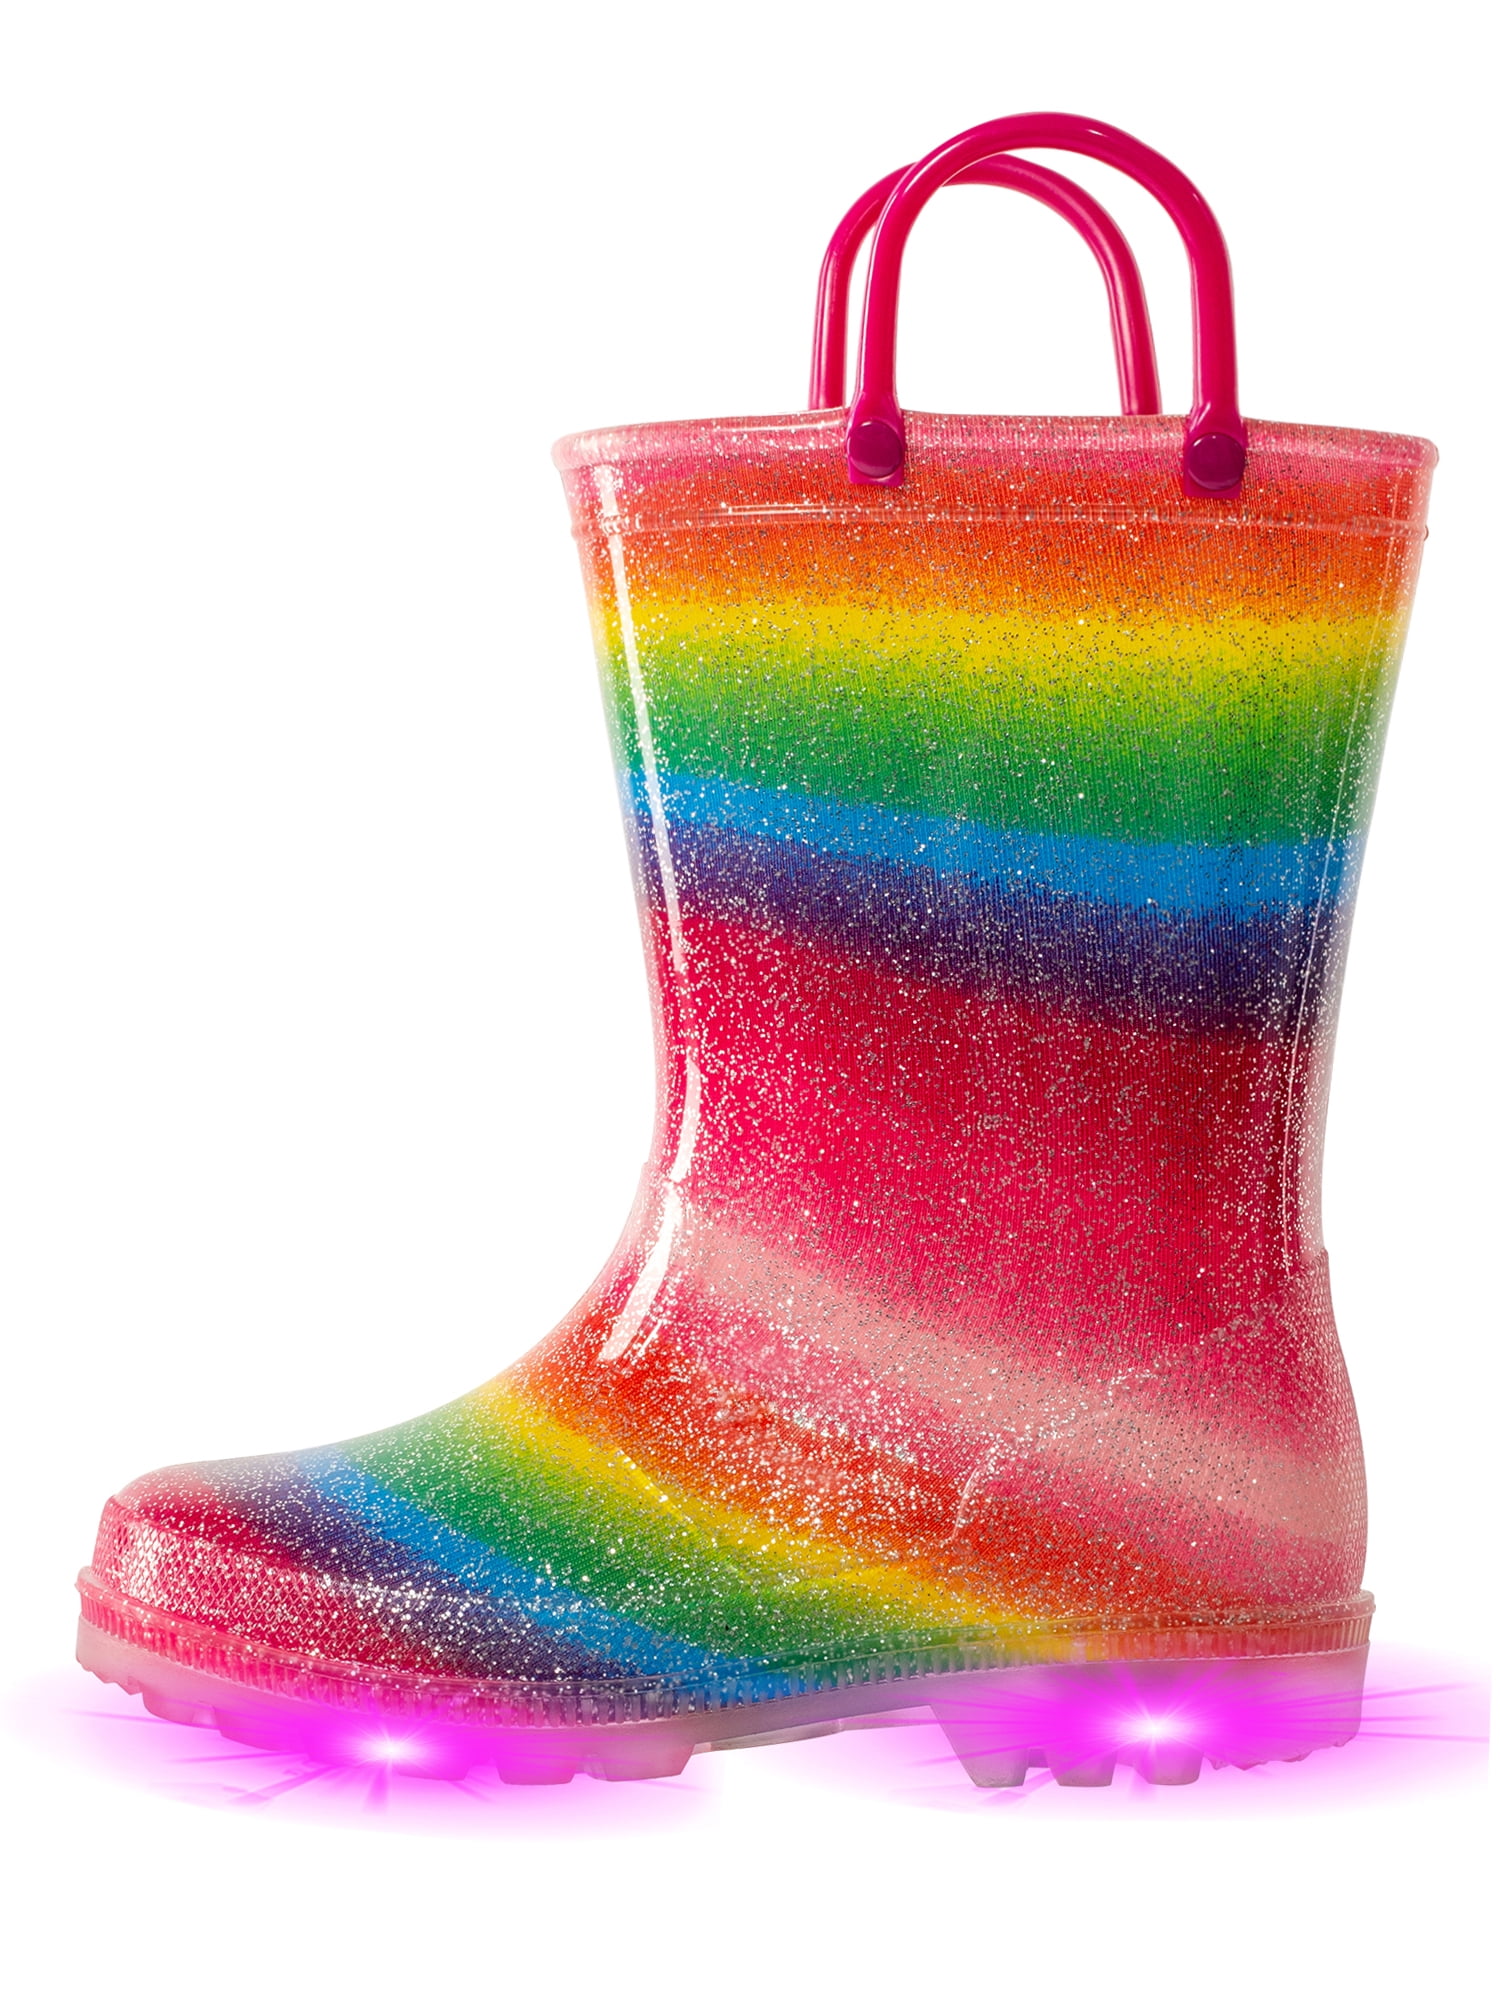 EUXTERPA Toddler-Kids Waterproof Light Up Rain Boots Patterns and Glitter Boots with Handles for Boys and Girls 